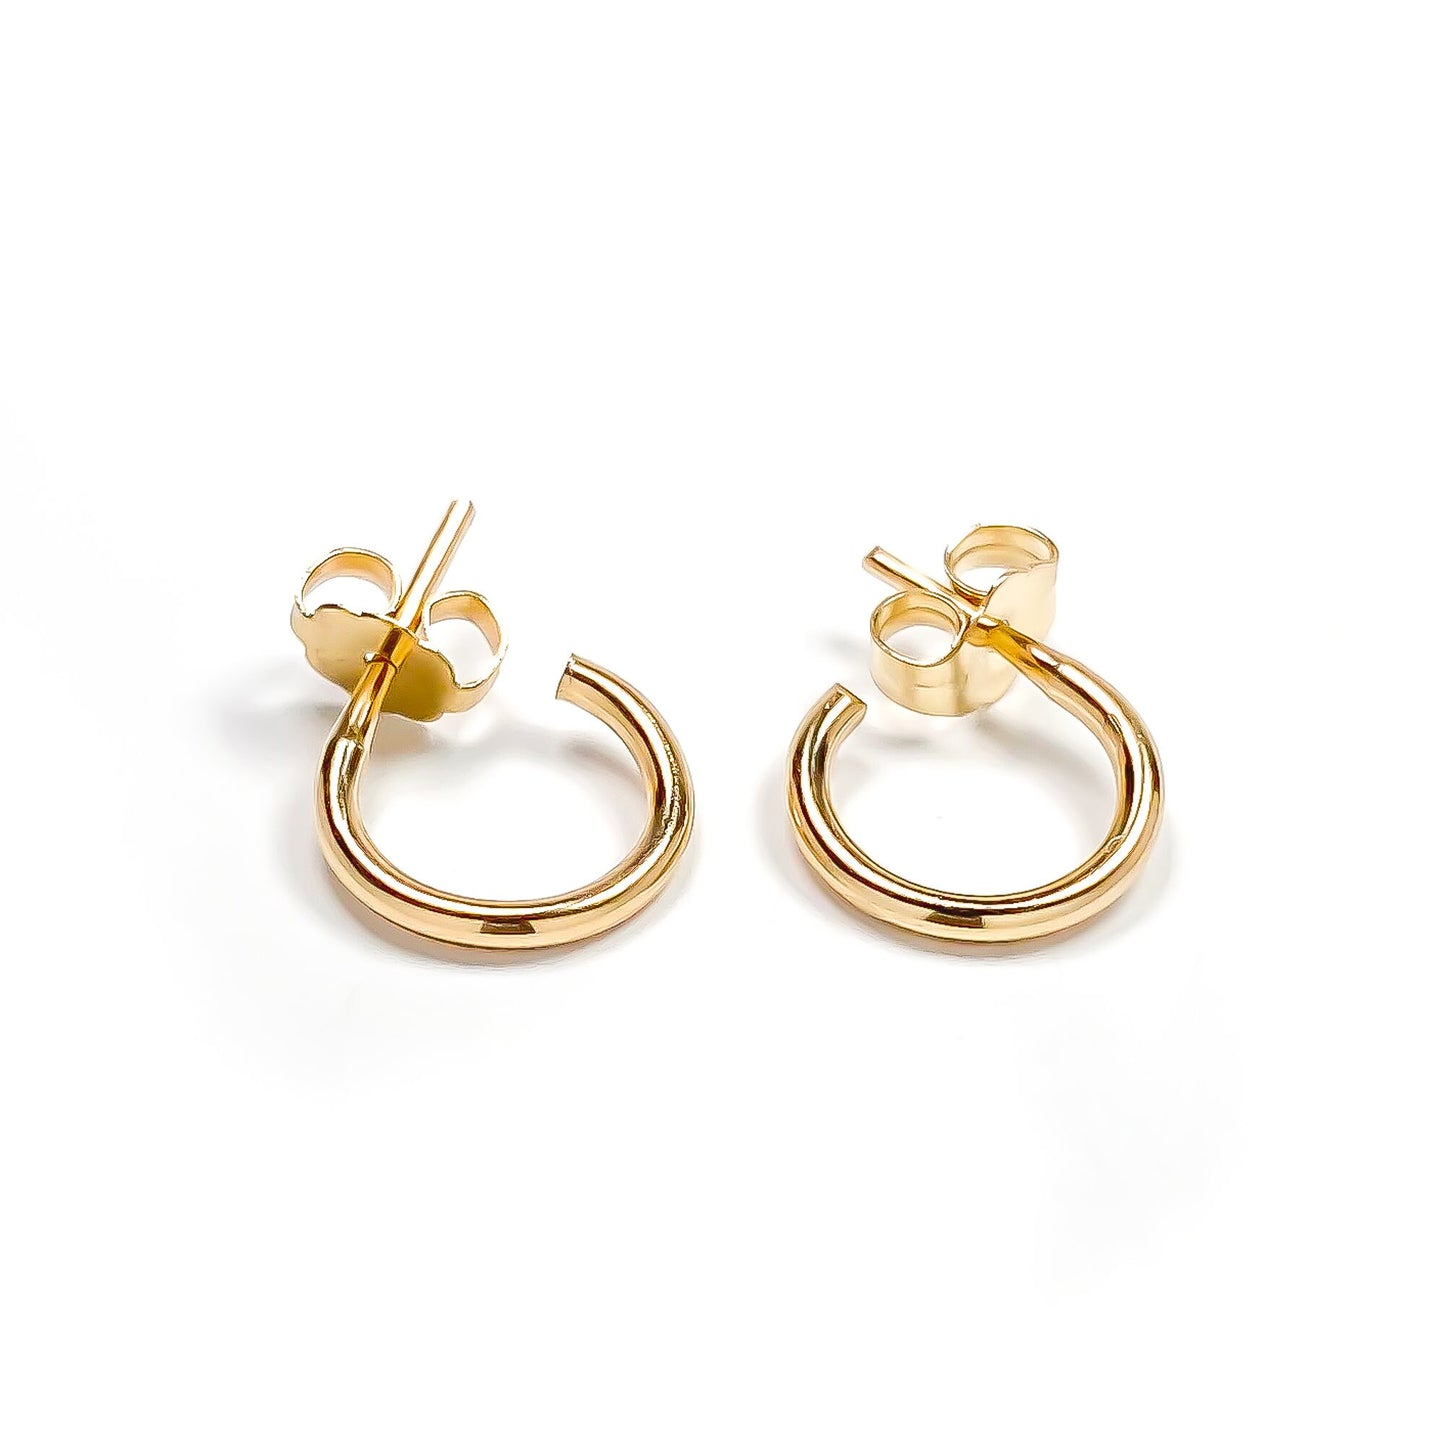 9mm Hoop Earrings with Post, 14K Gold Filled